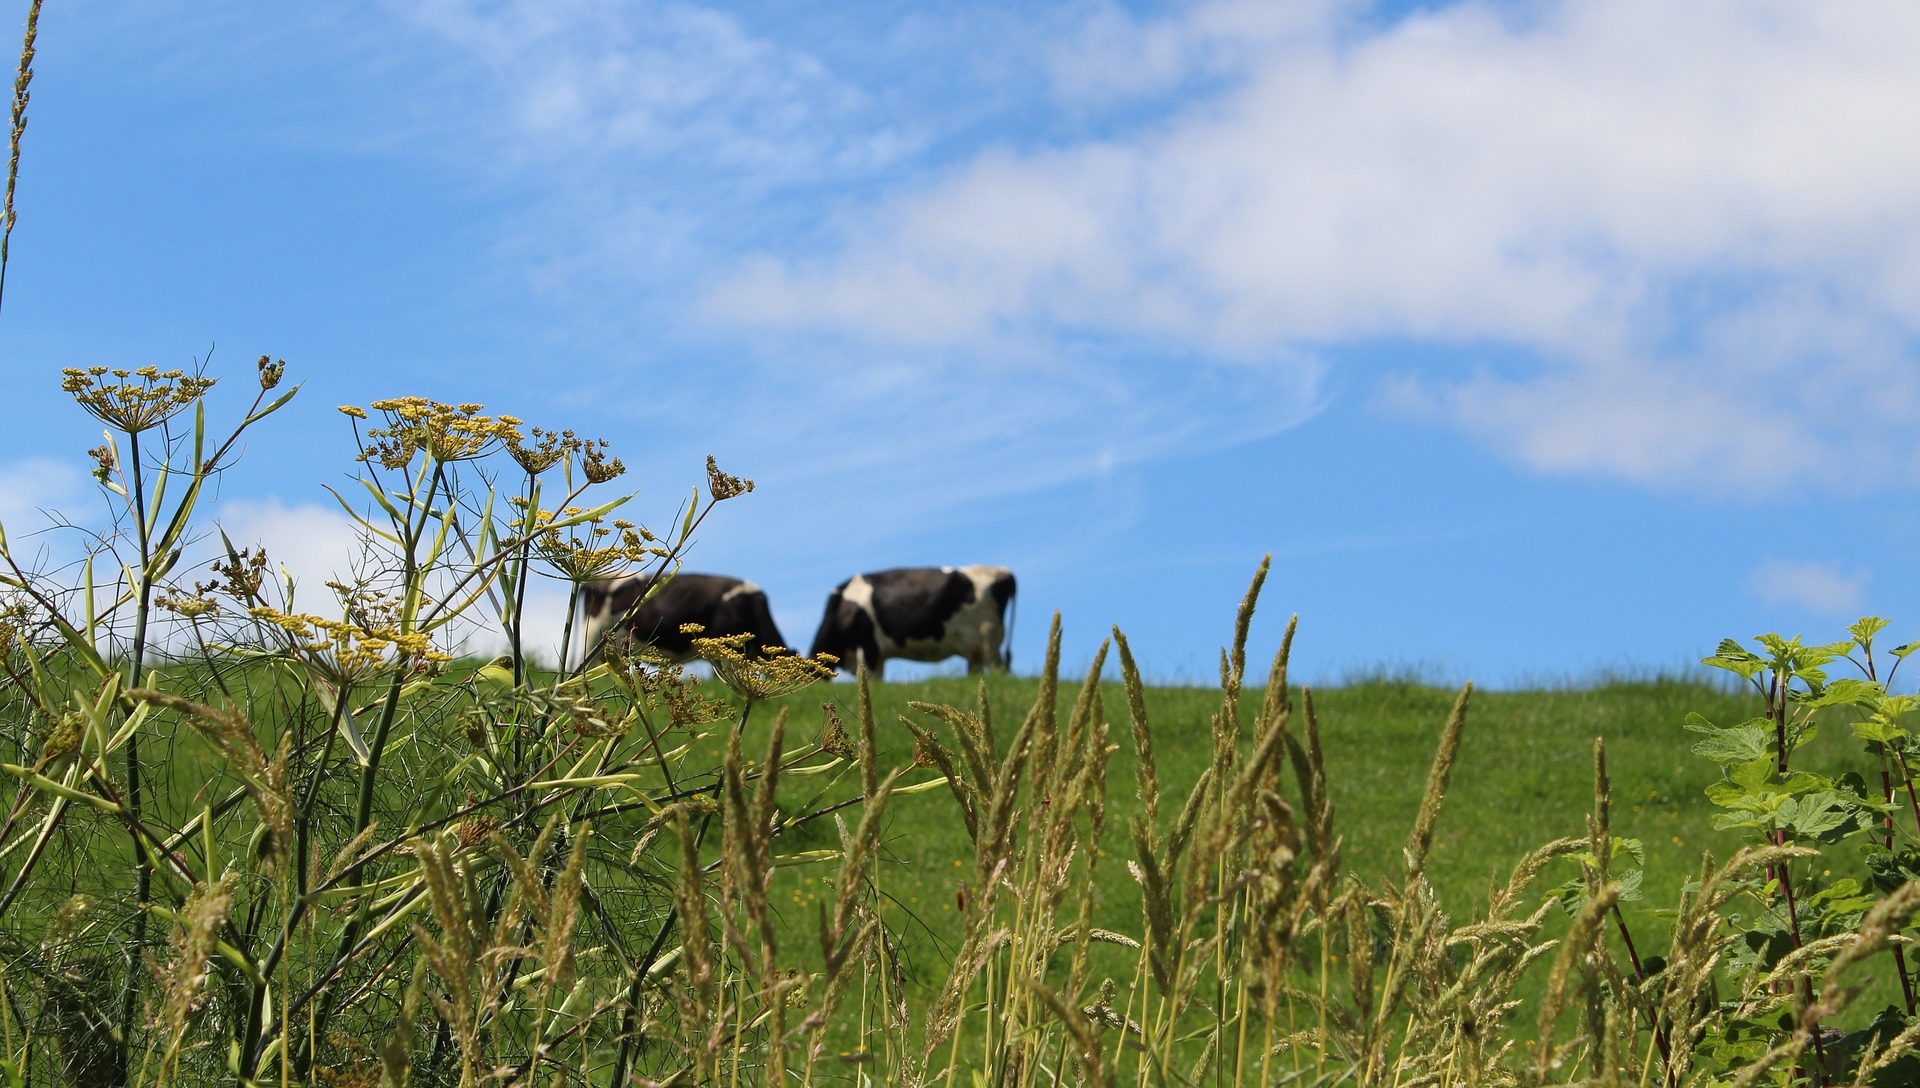 Two cows in a field.